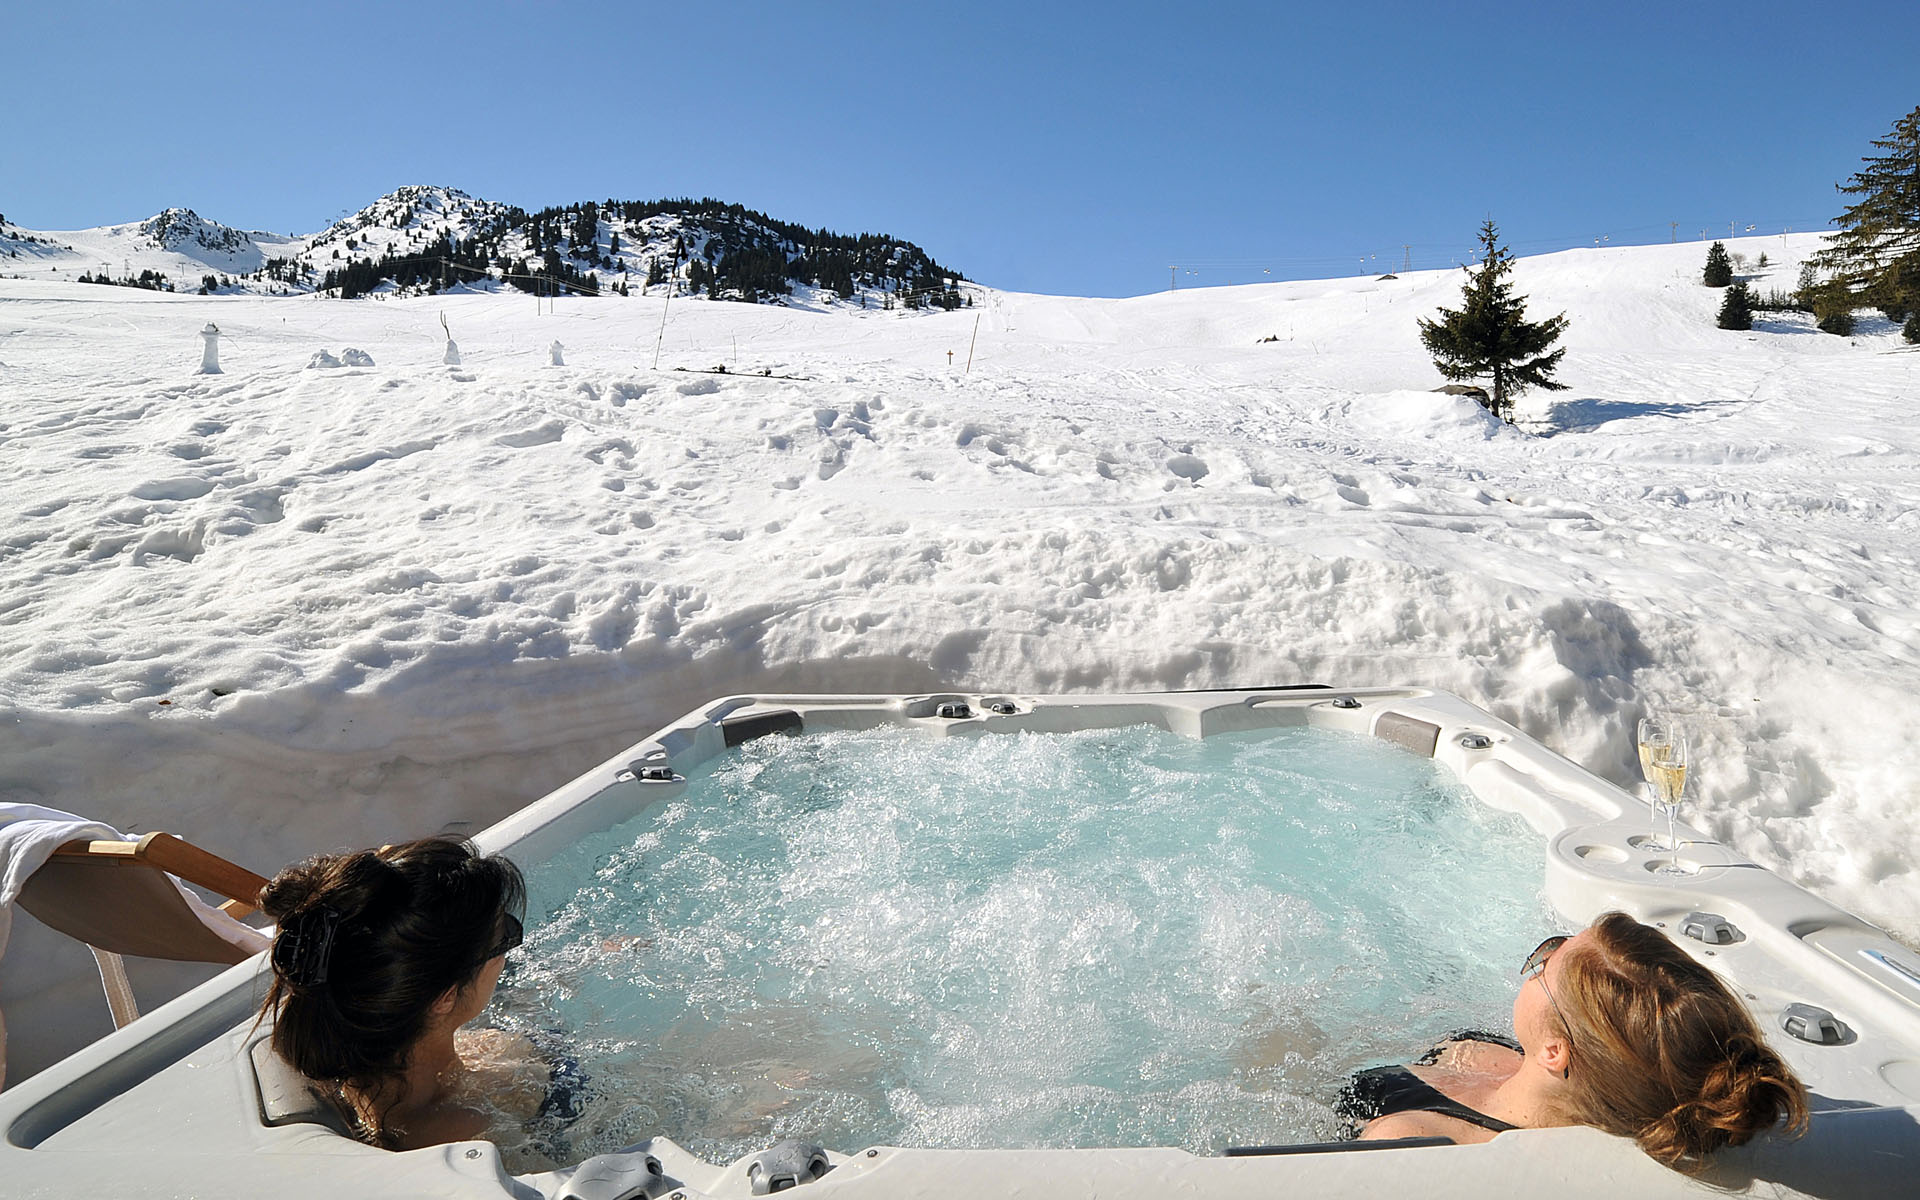 Using The Hot Tub During The Winter